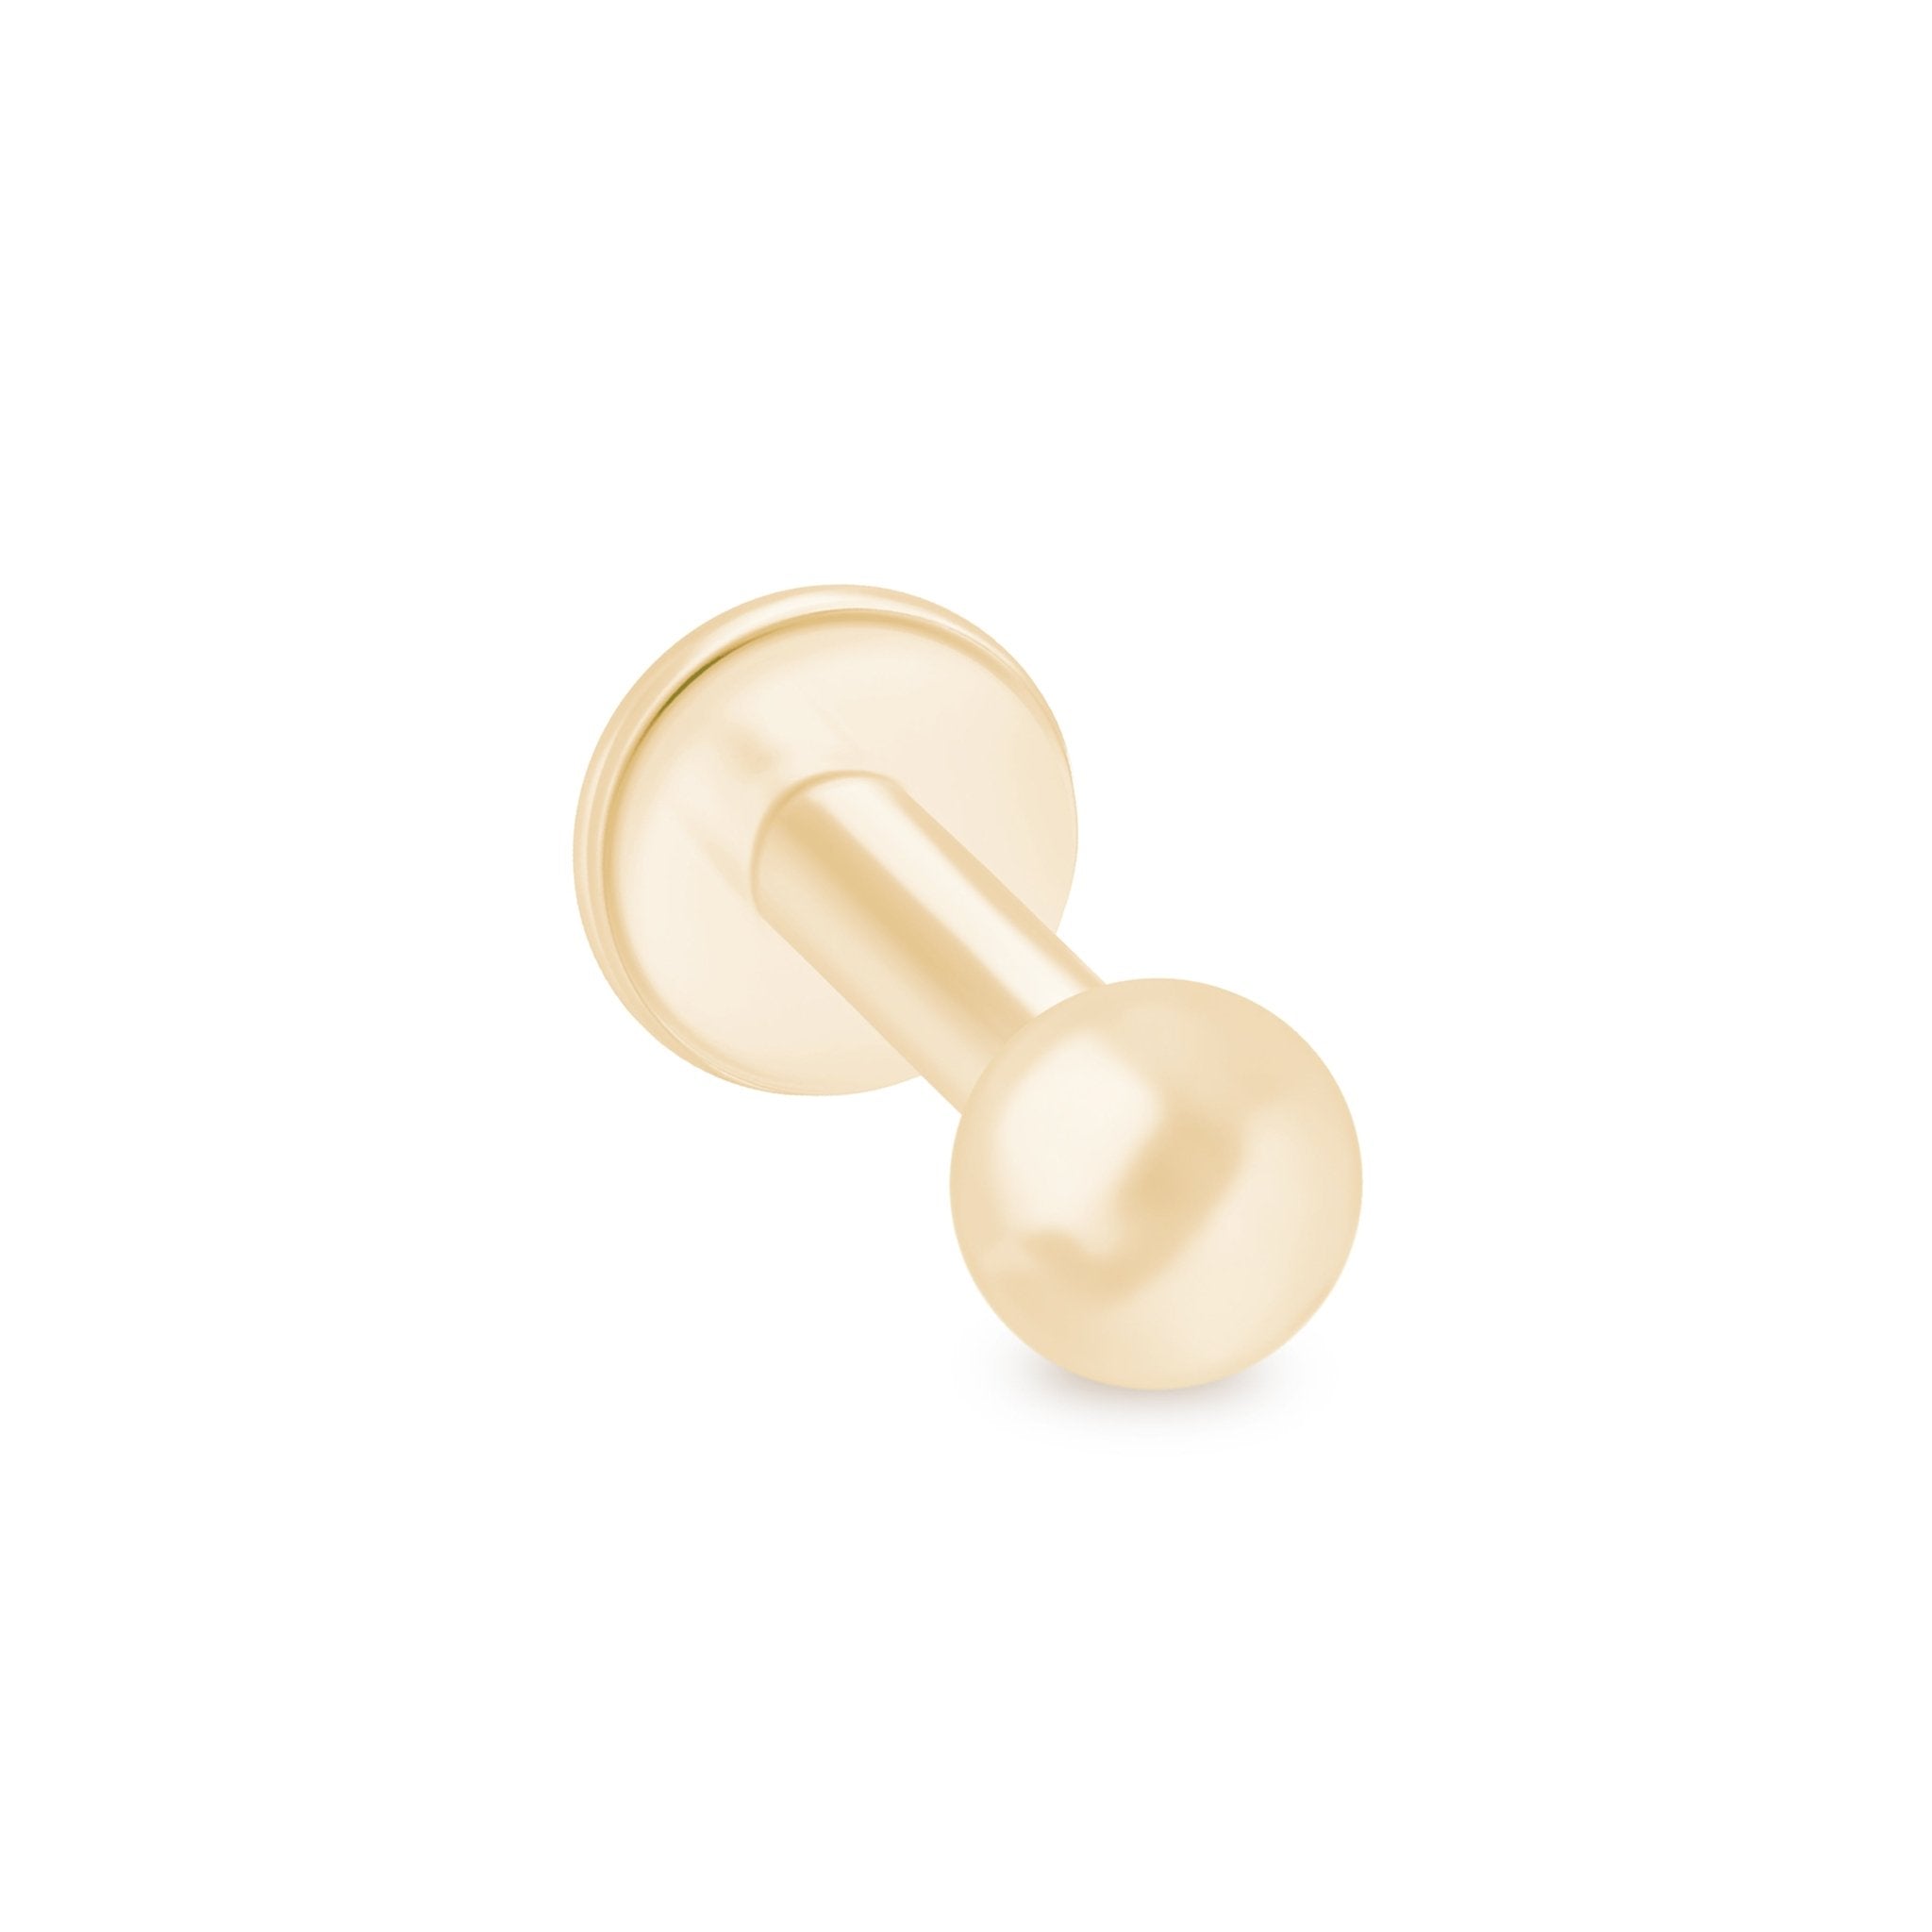 Ball Flat Back Stud Earrings Estella Collection #product_description# 18098 Cartilage Earring Cartilage Earrings Cartilage Piercing #tag4# #tag5# #tag6# #tag7# #tag8# #tag9# #tag10# 2.5MM 5MM